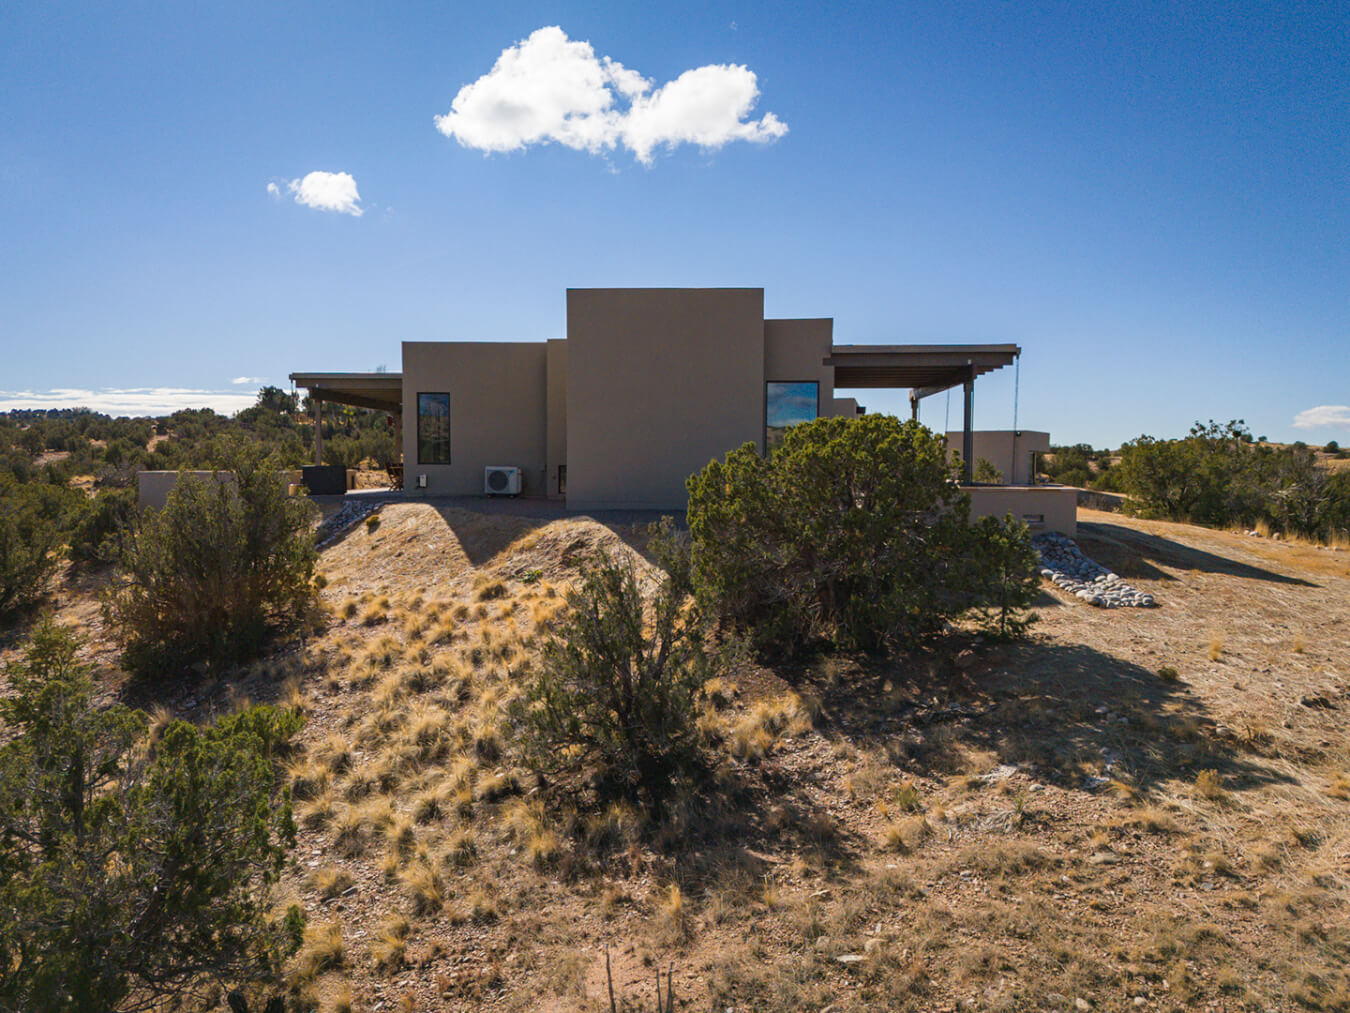 A Santa Fe-inspired house beautifully designed by an architect sits atop a hill in the desert.